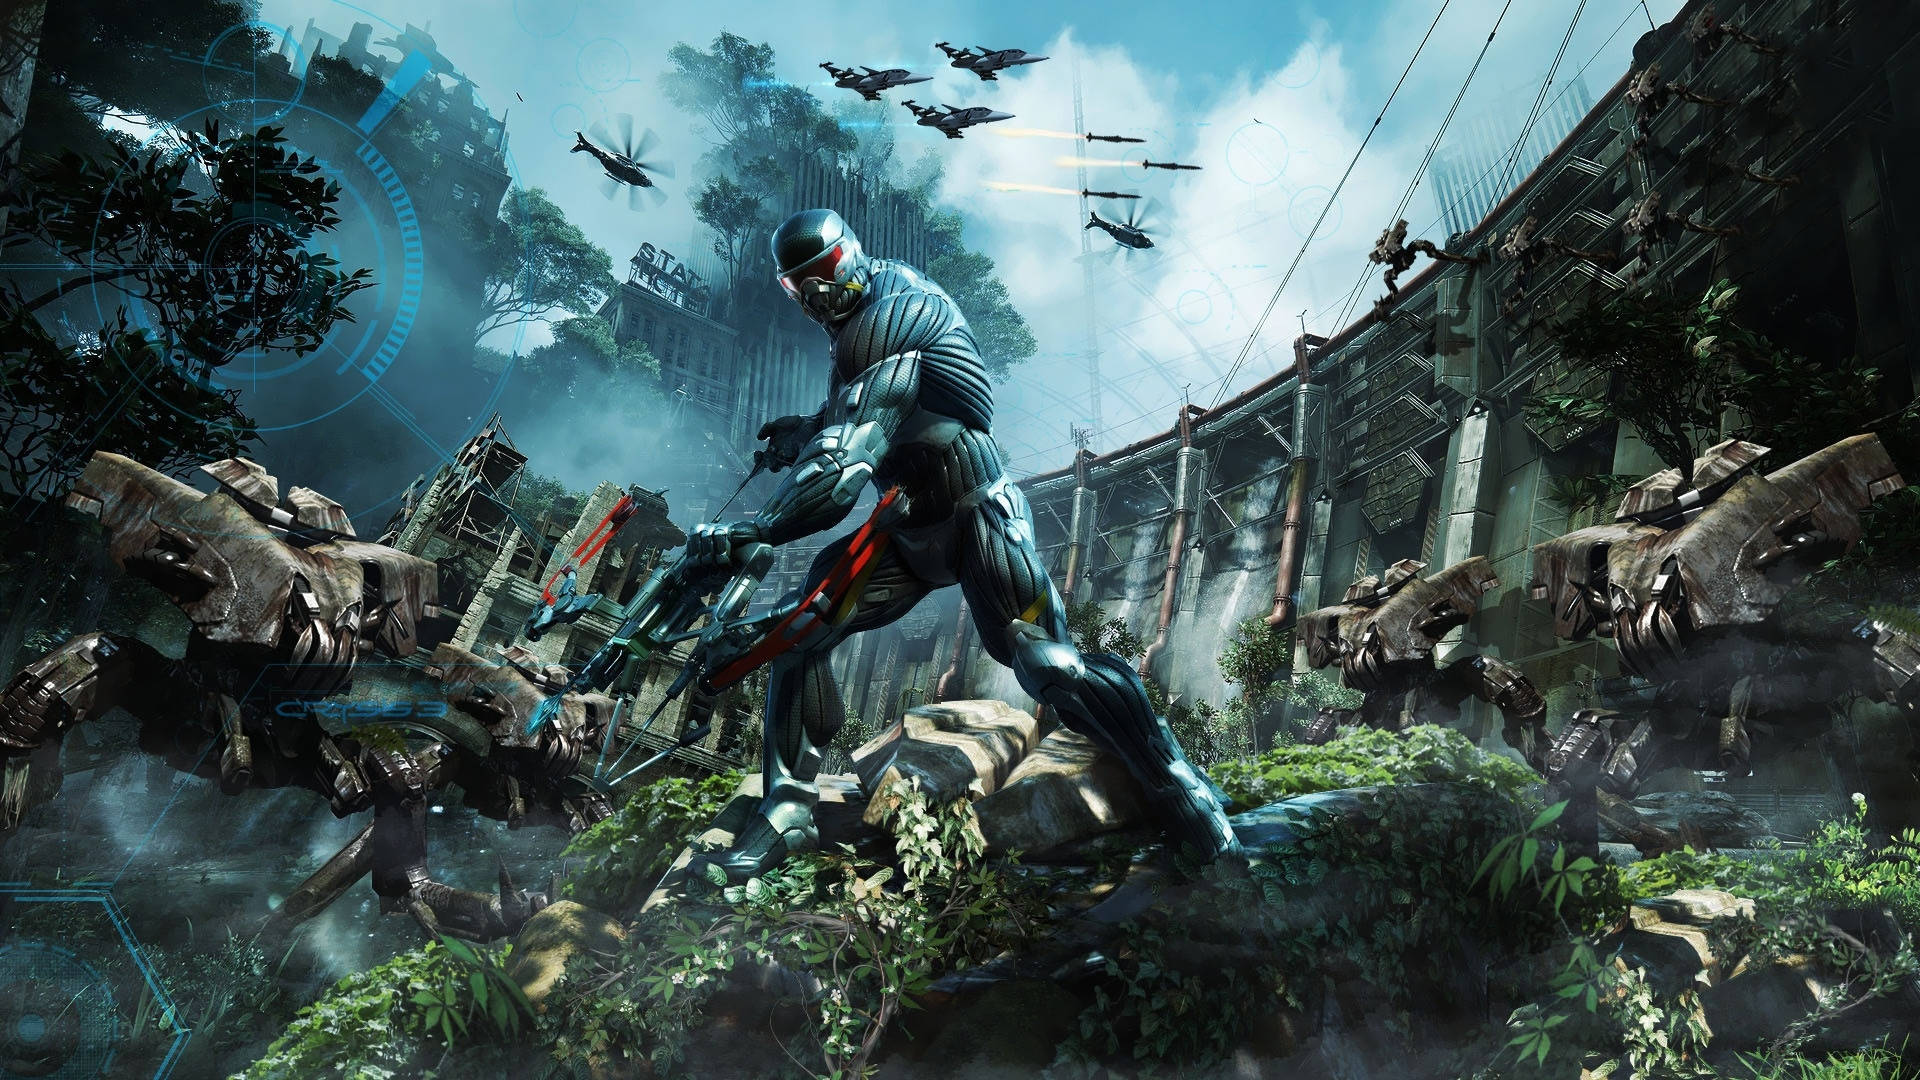 In Crysis Remastered, take the fight to the alien invaders and save humanity! Wallpaper